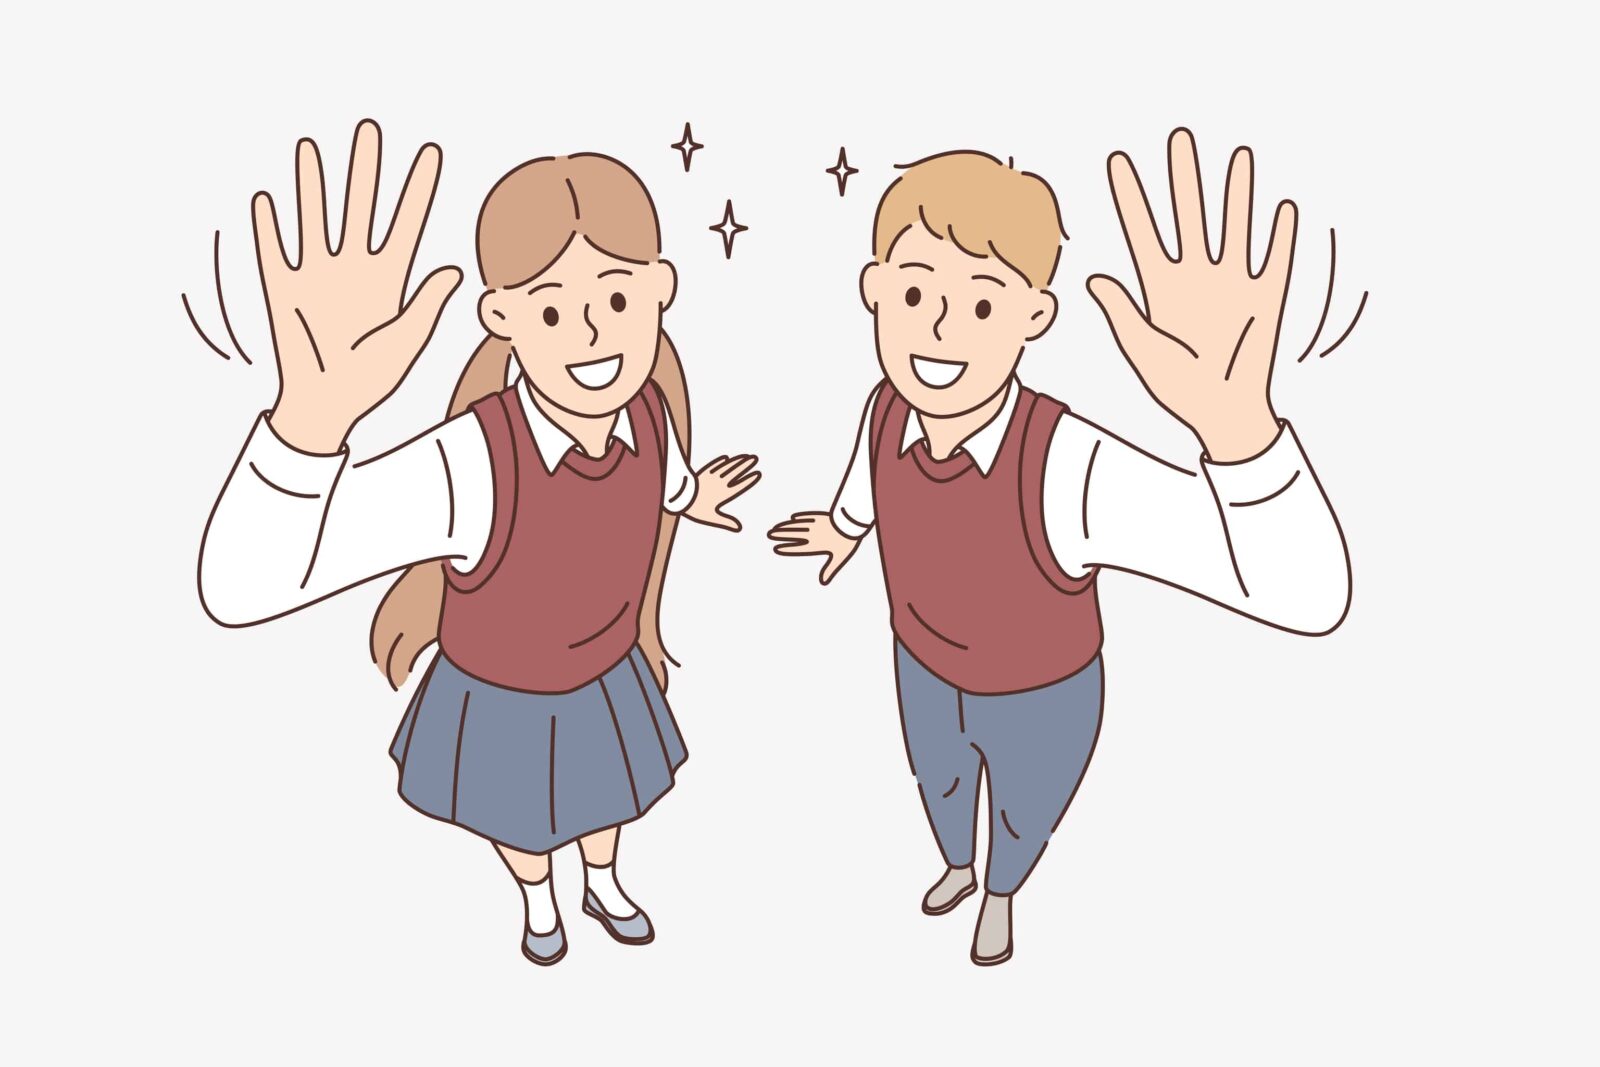 Education, studying and knowledge concept. Smiling boy and girl students pupils standing waving hands looking at camera showing excitement vector illustration